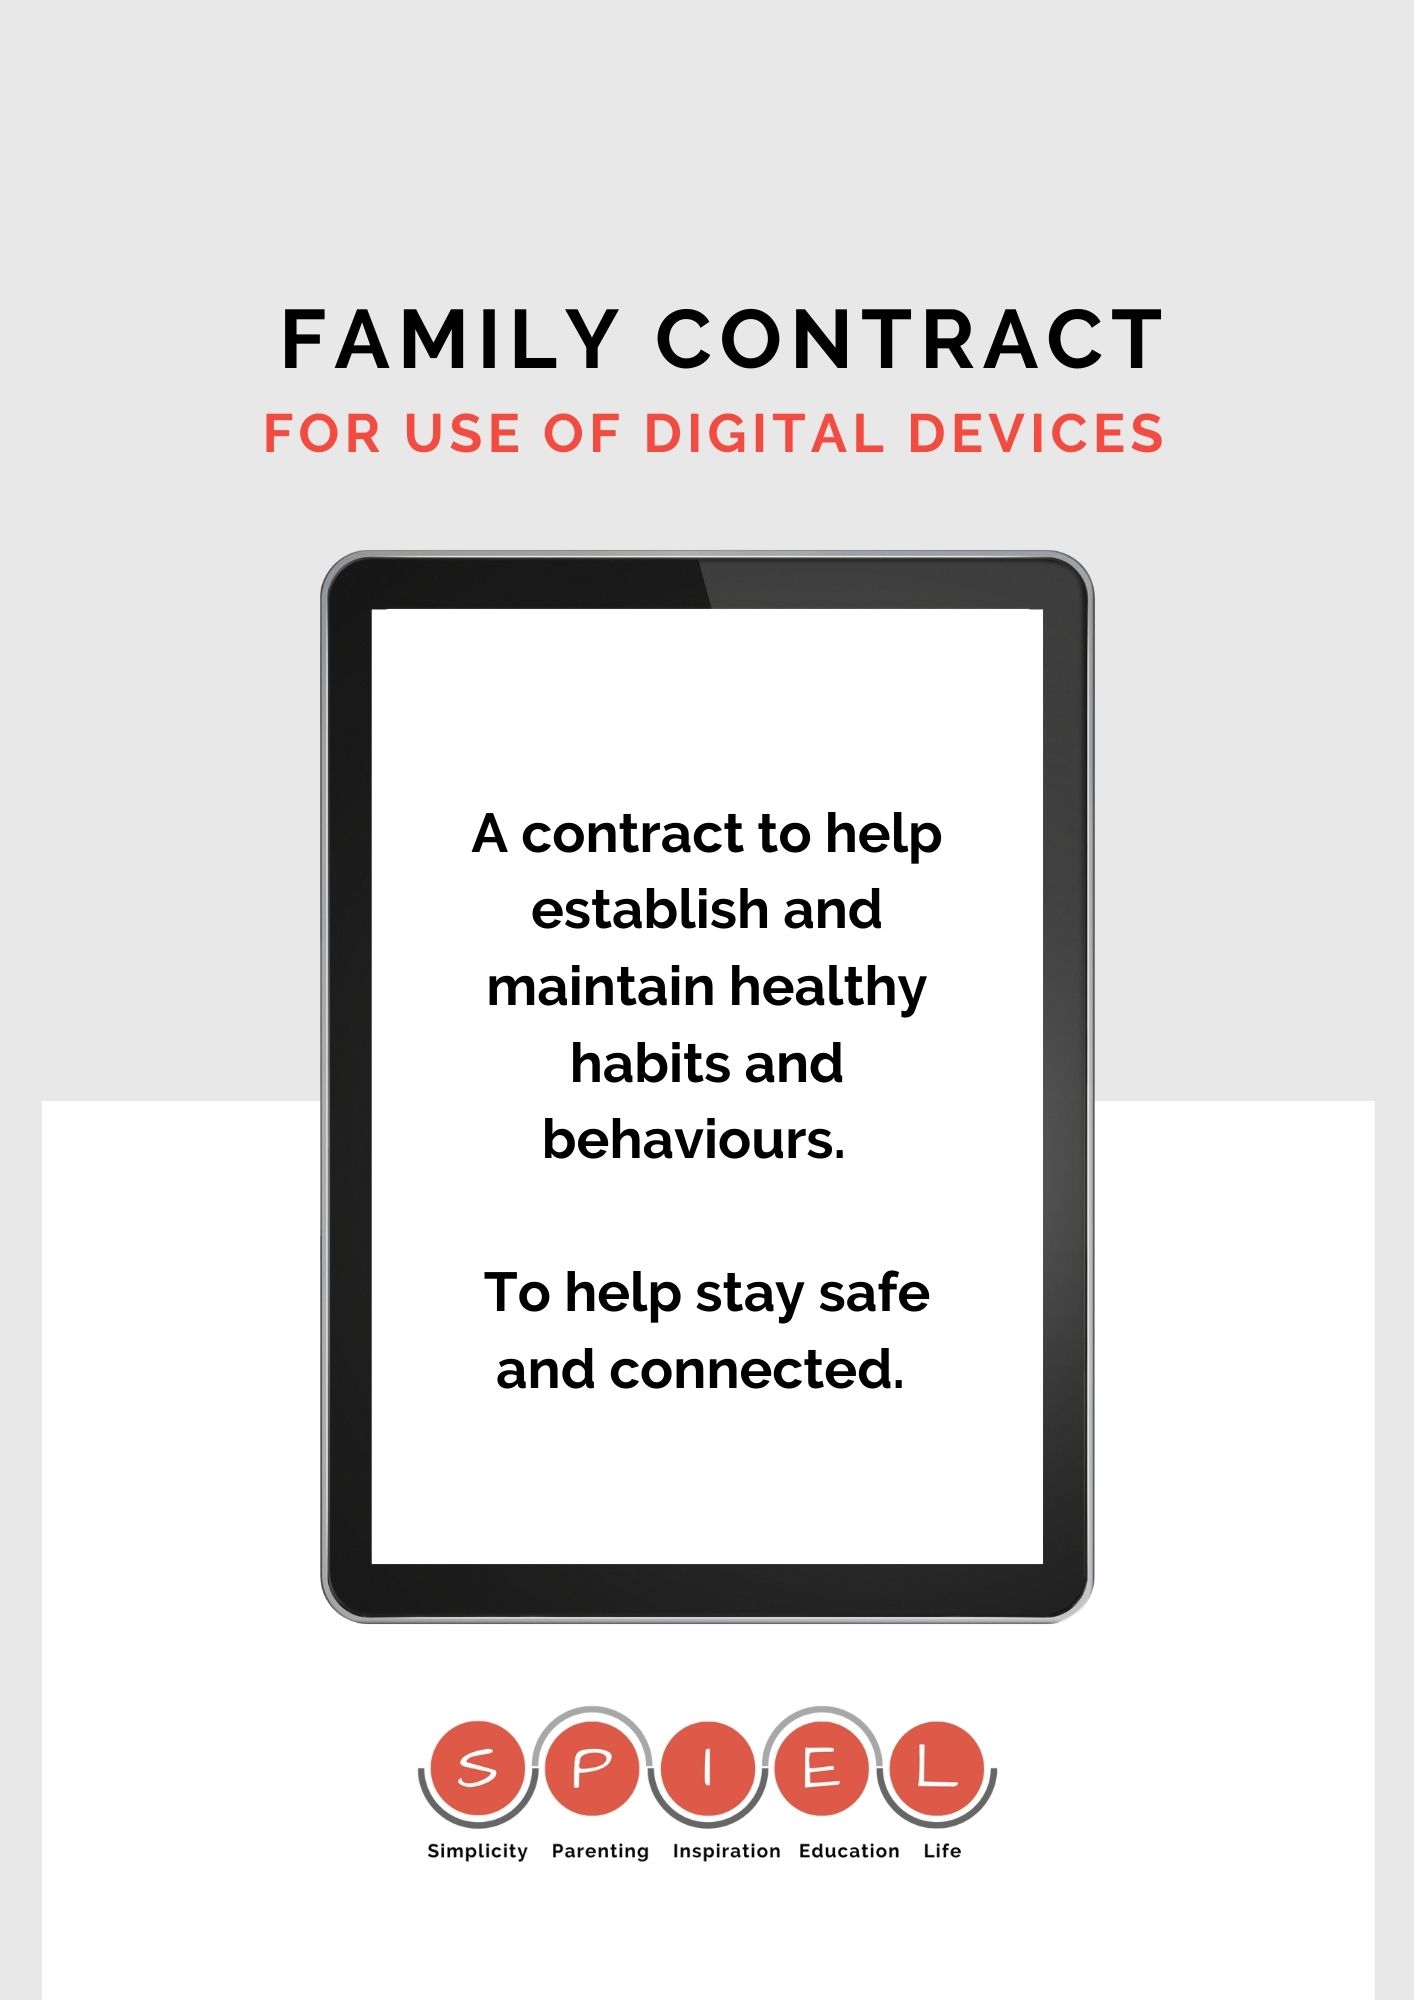 Family Digital Use Contract